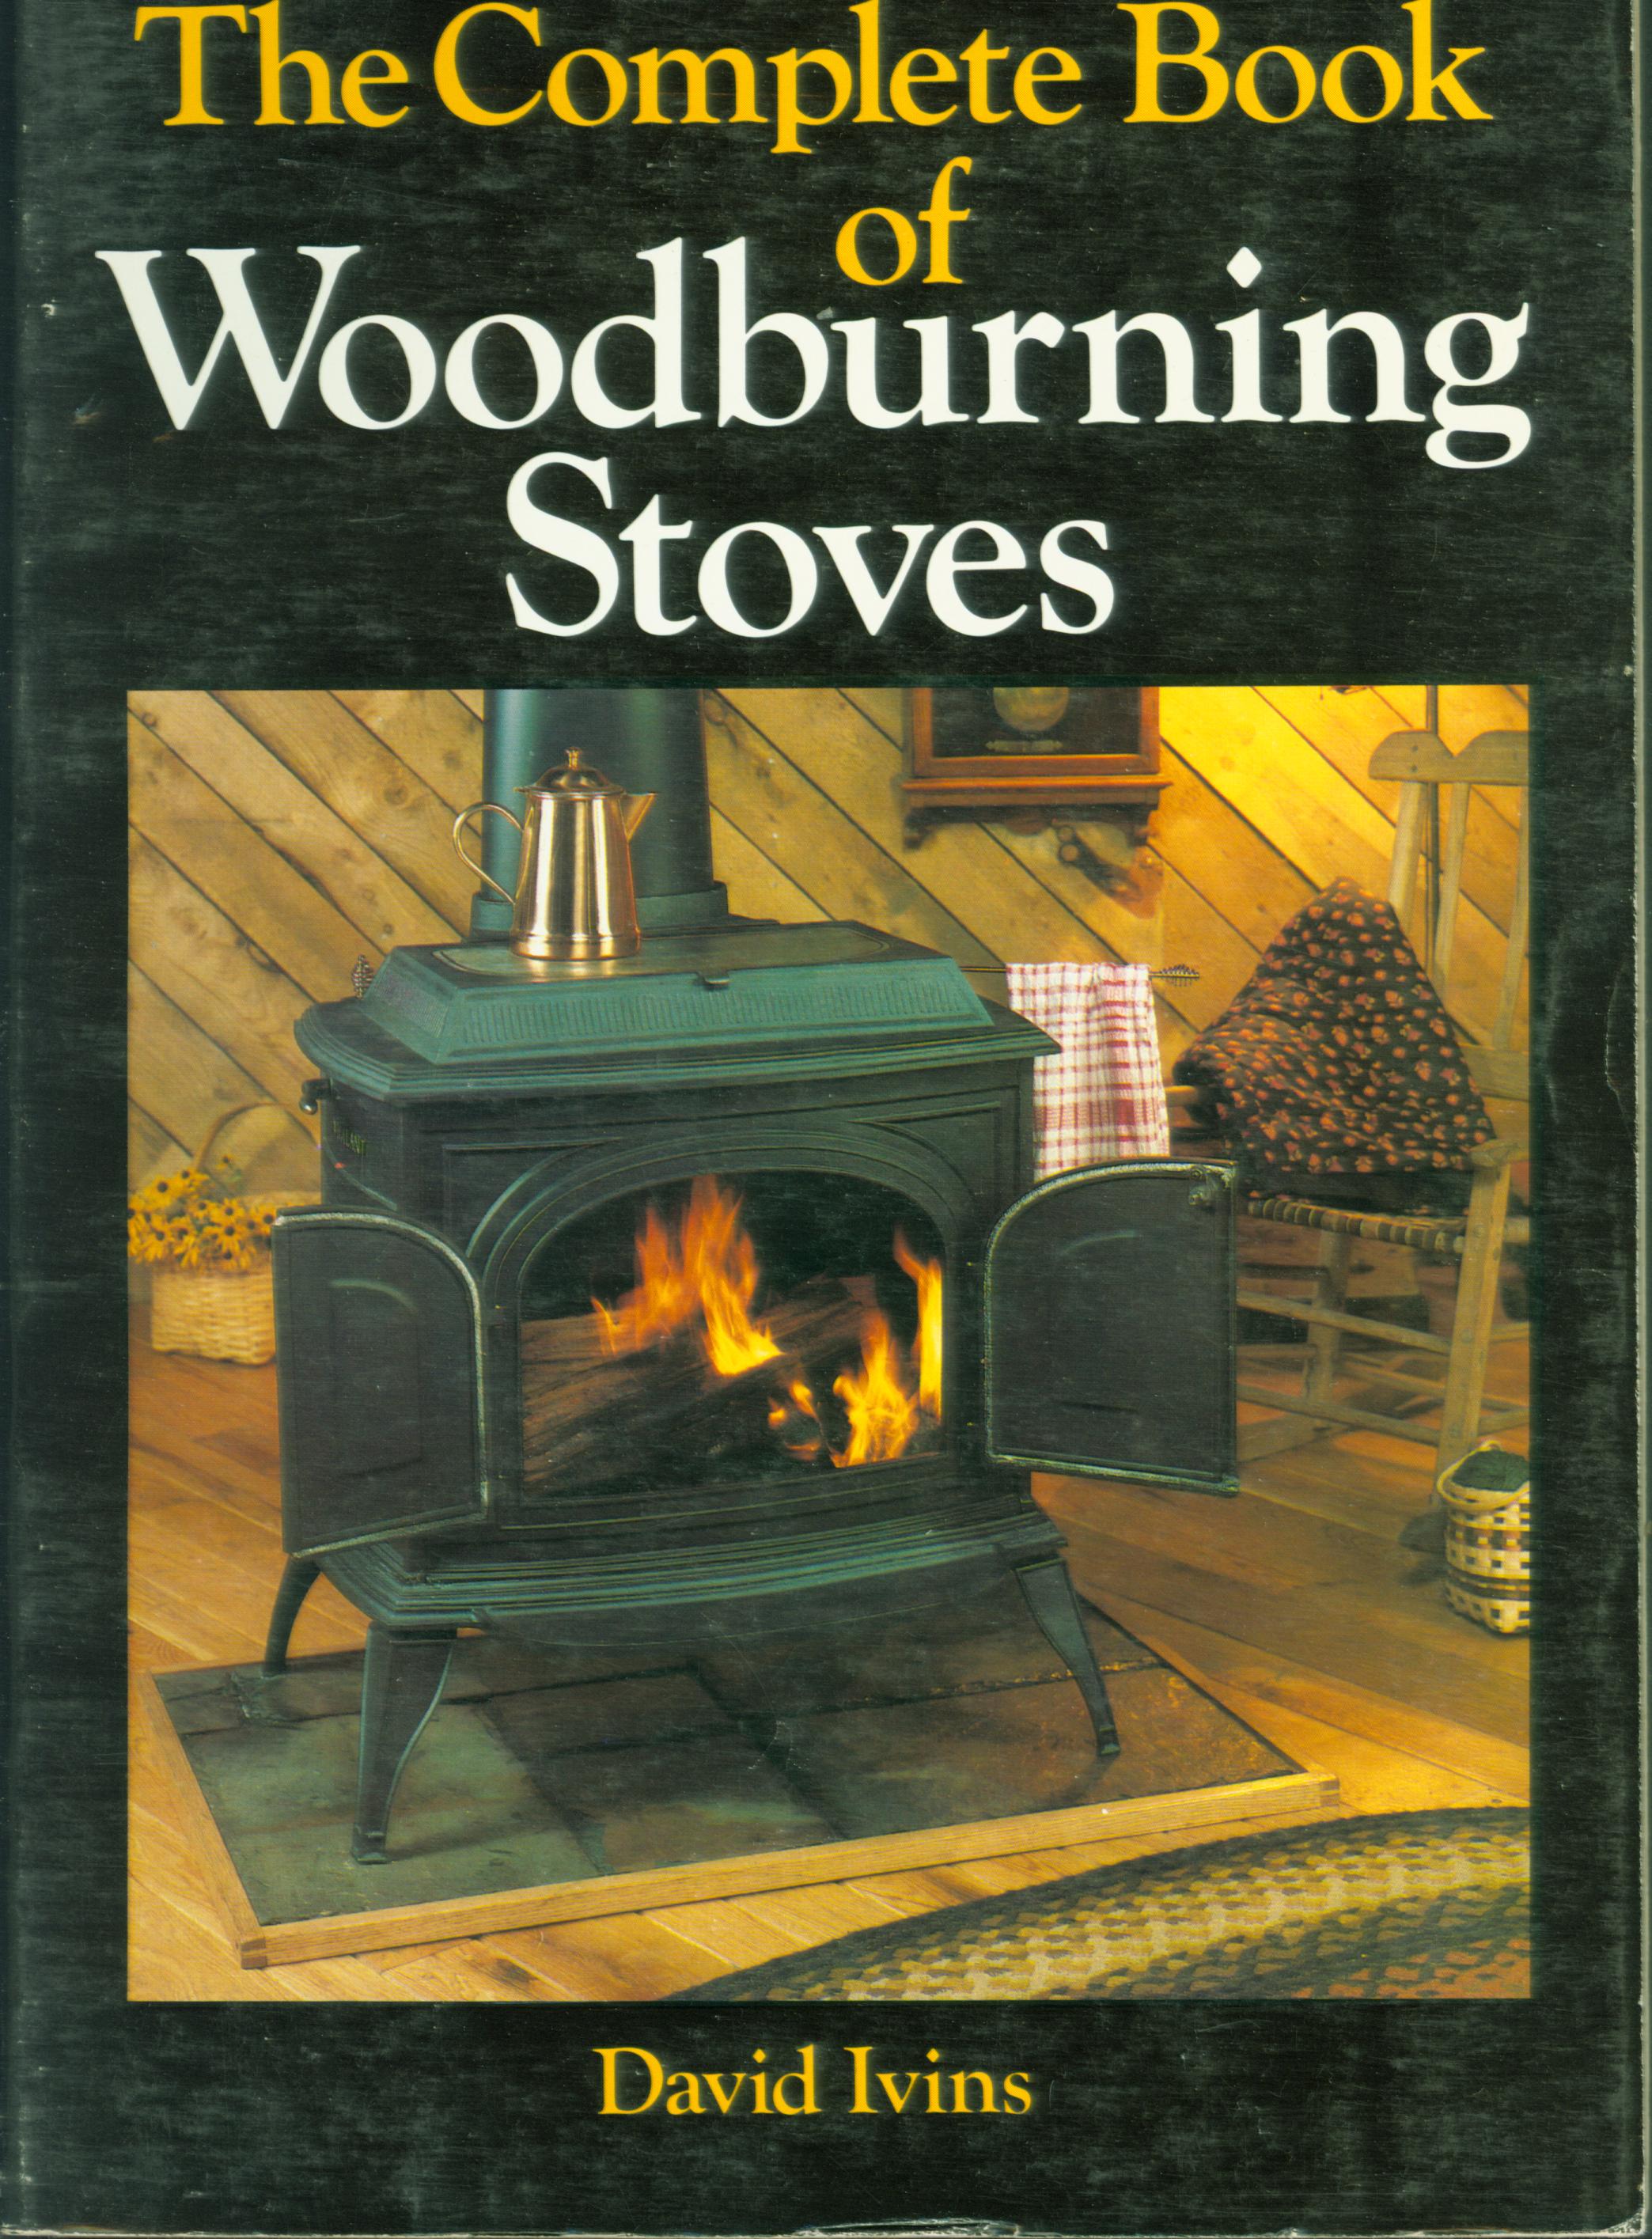 THE COMPLETE BOOK OF WOODBURNING STOVES. 